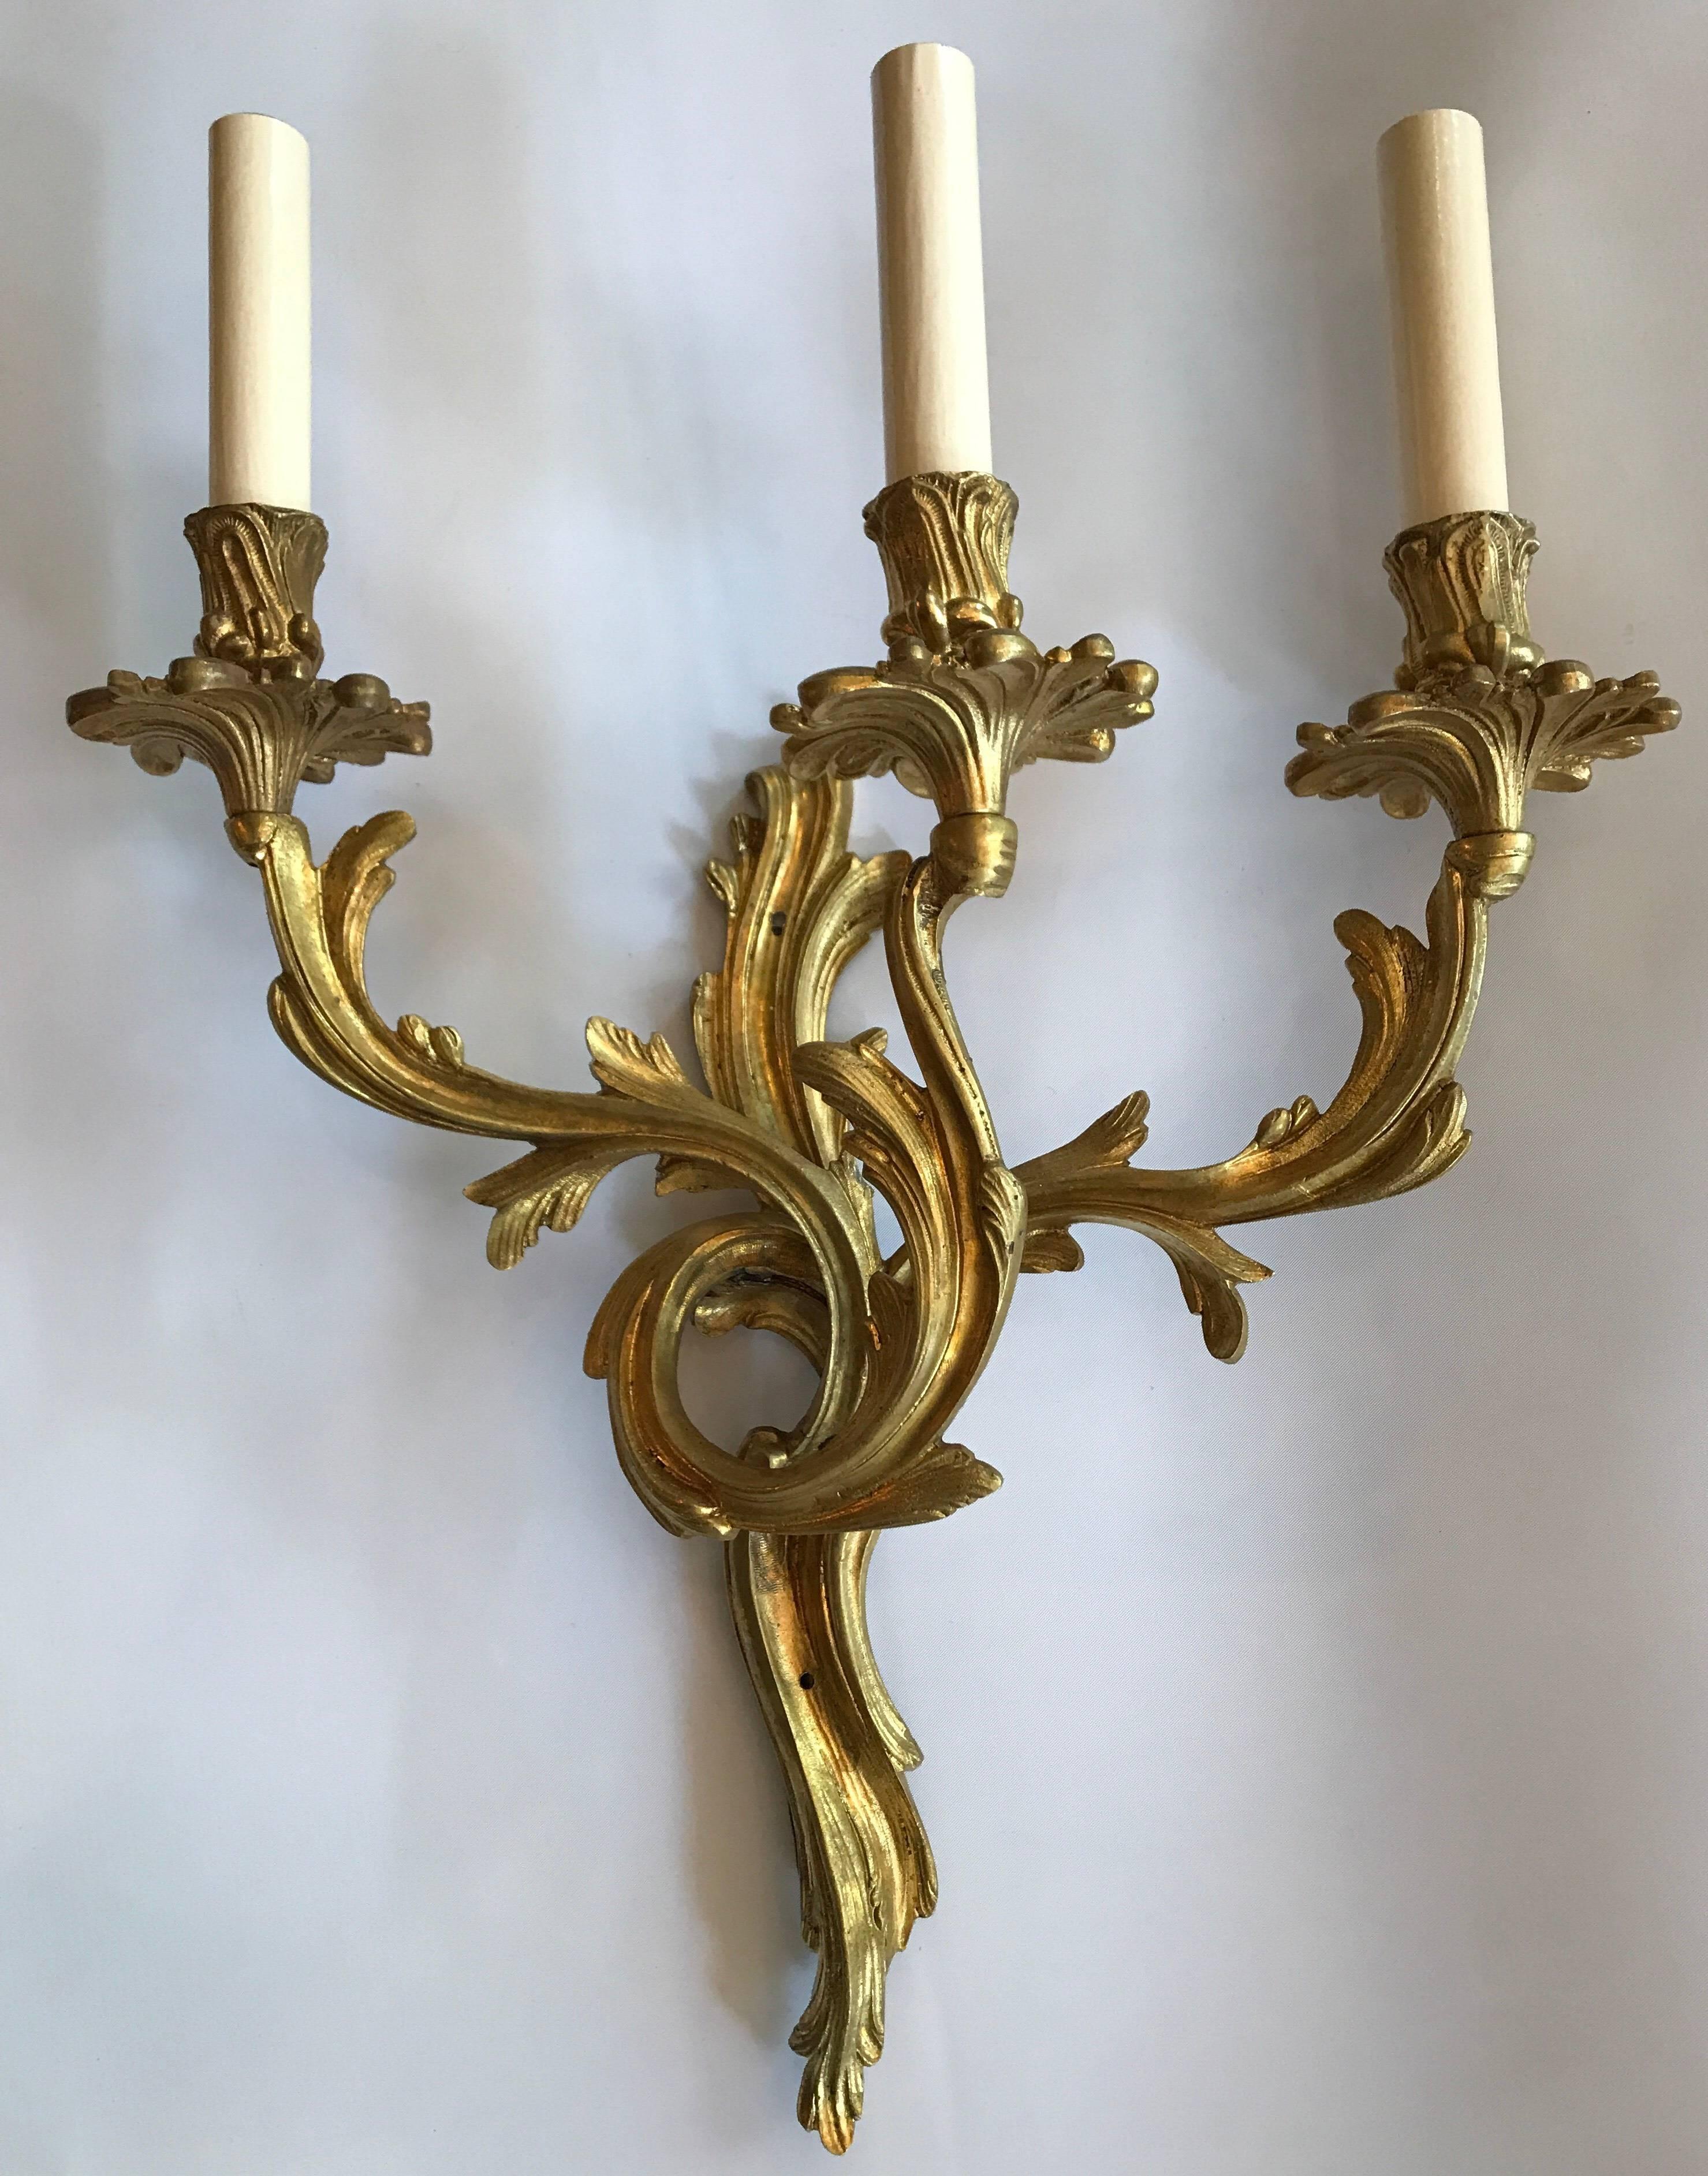 A pair of circa 1920s French Louis XVI style gilt bronze sconces with three lights.

Measurements:
Height 20